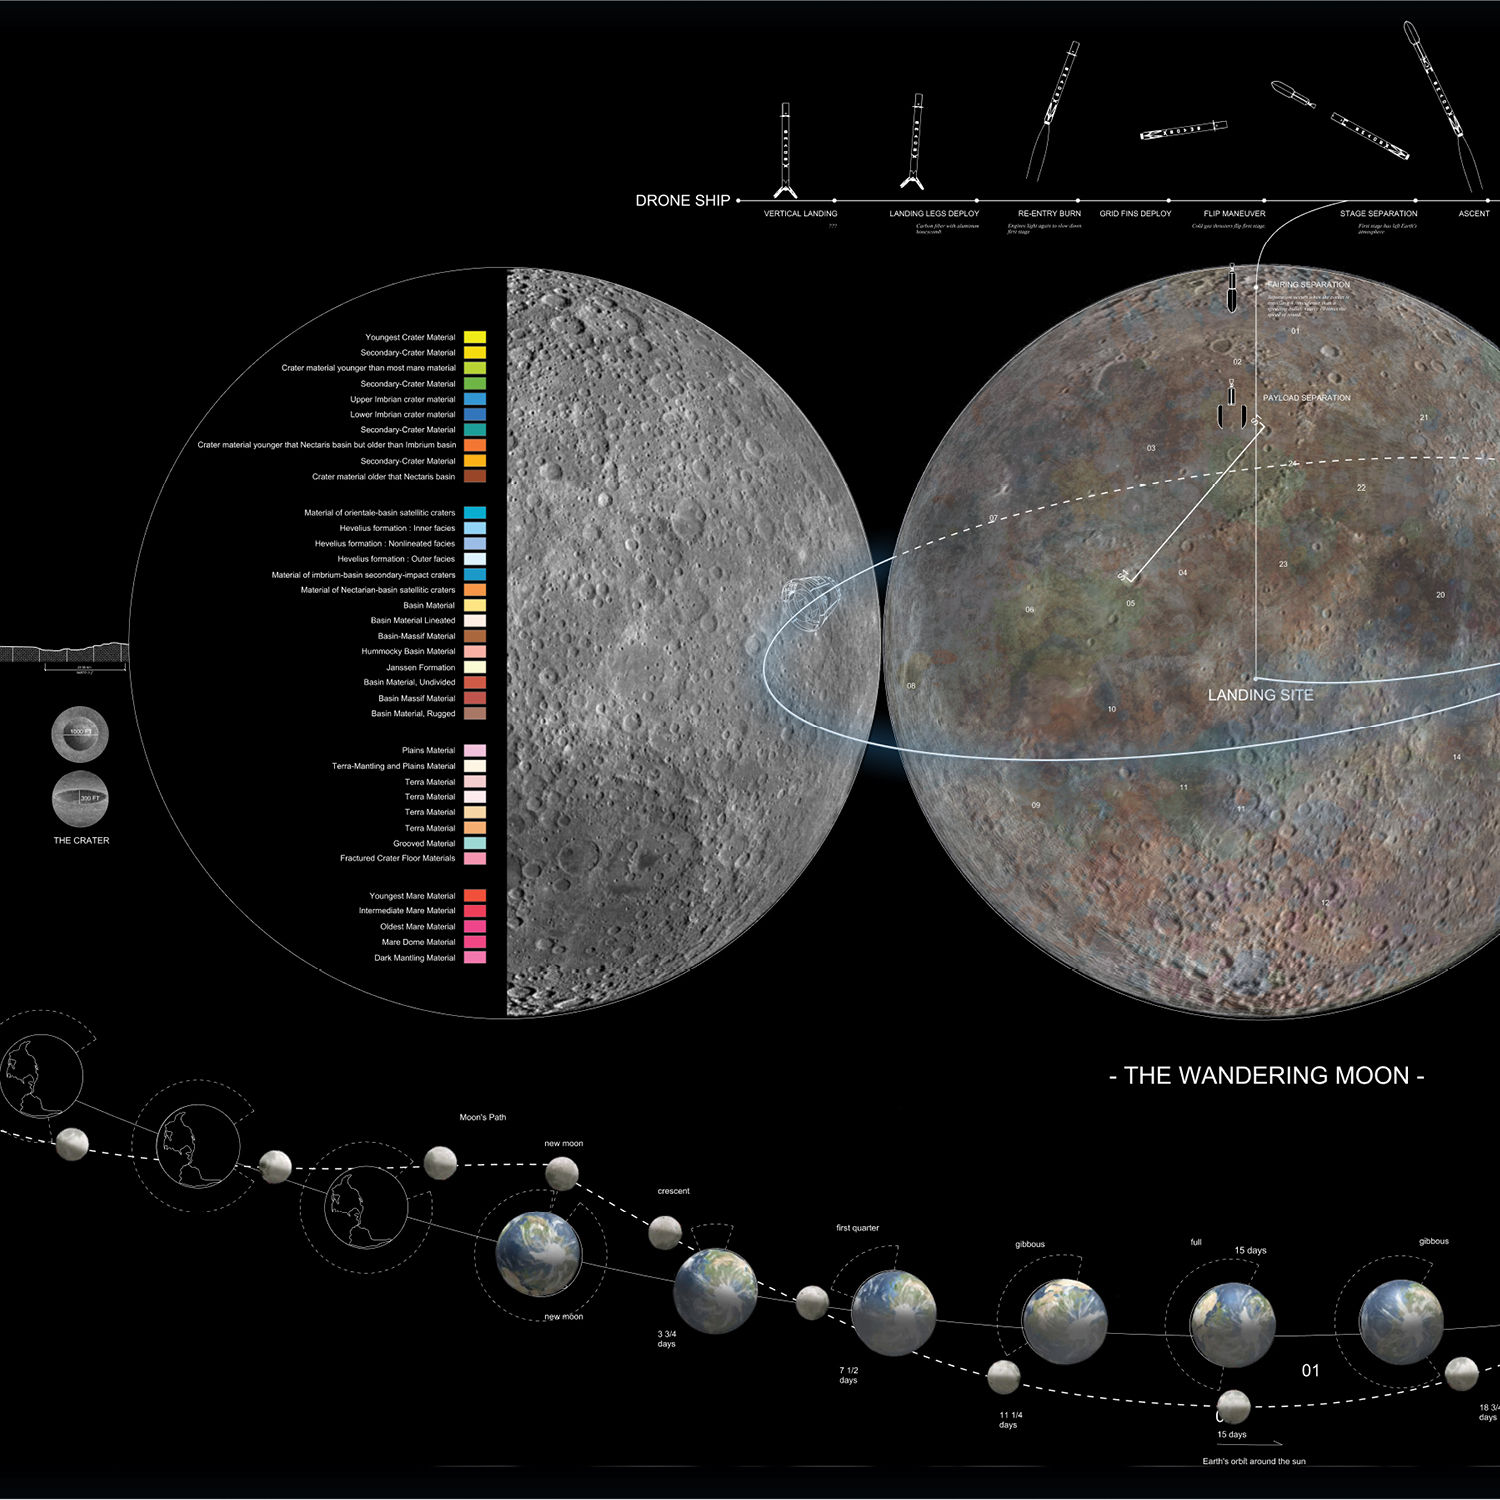 Trajectory calculations of the moon.